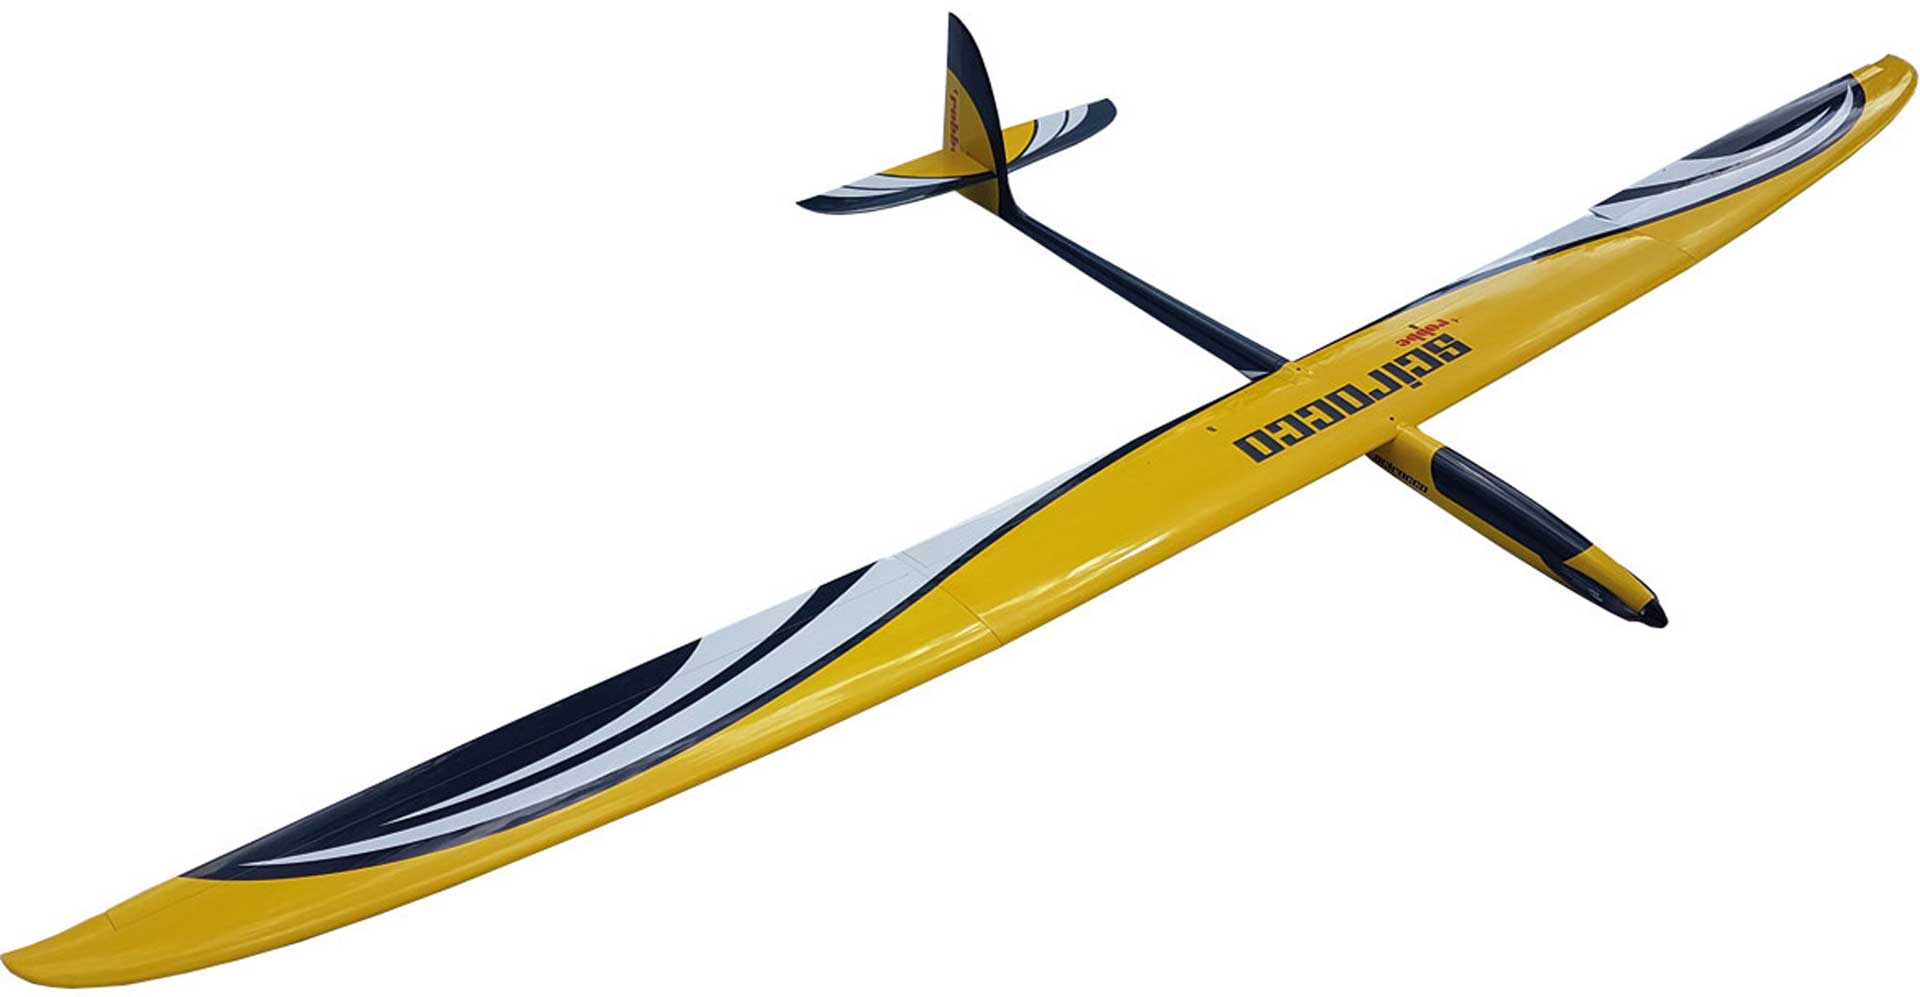 Robbe Modellsport SCIROCCO 4,0 M ARF FULL-GRP HIGH-PERFORMANCE GLIDER WITH 4-FLAP WING